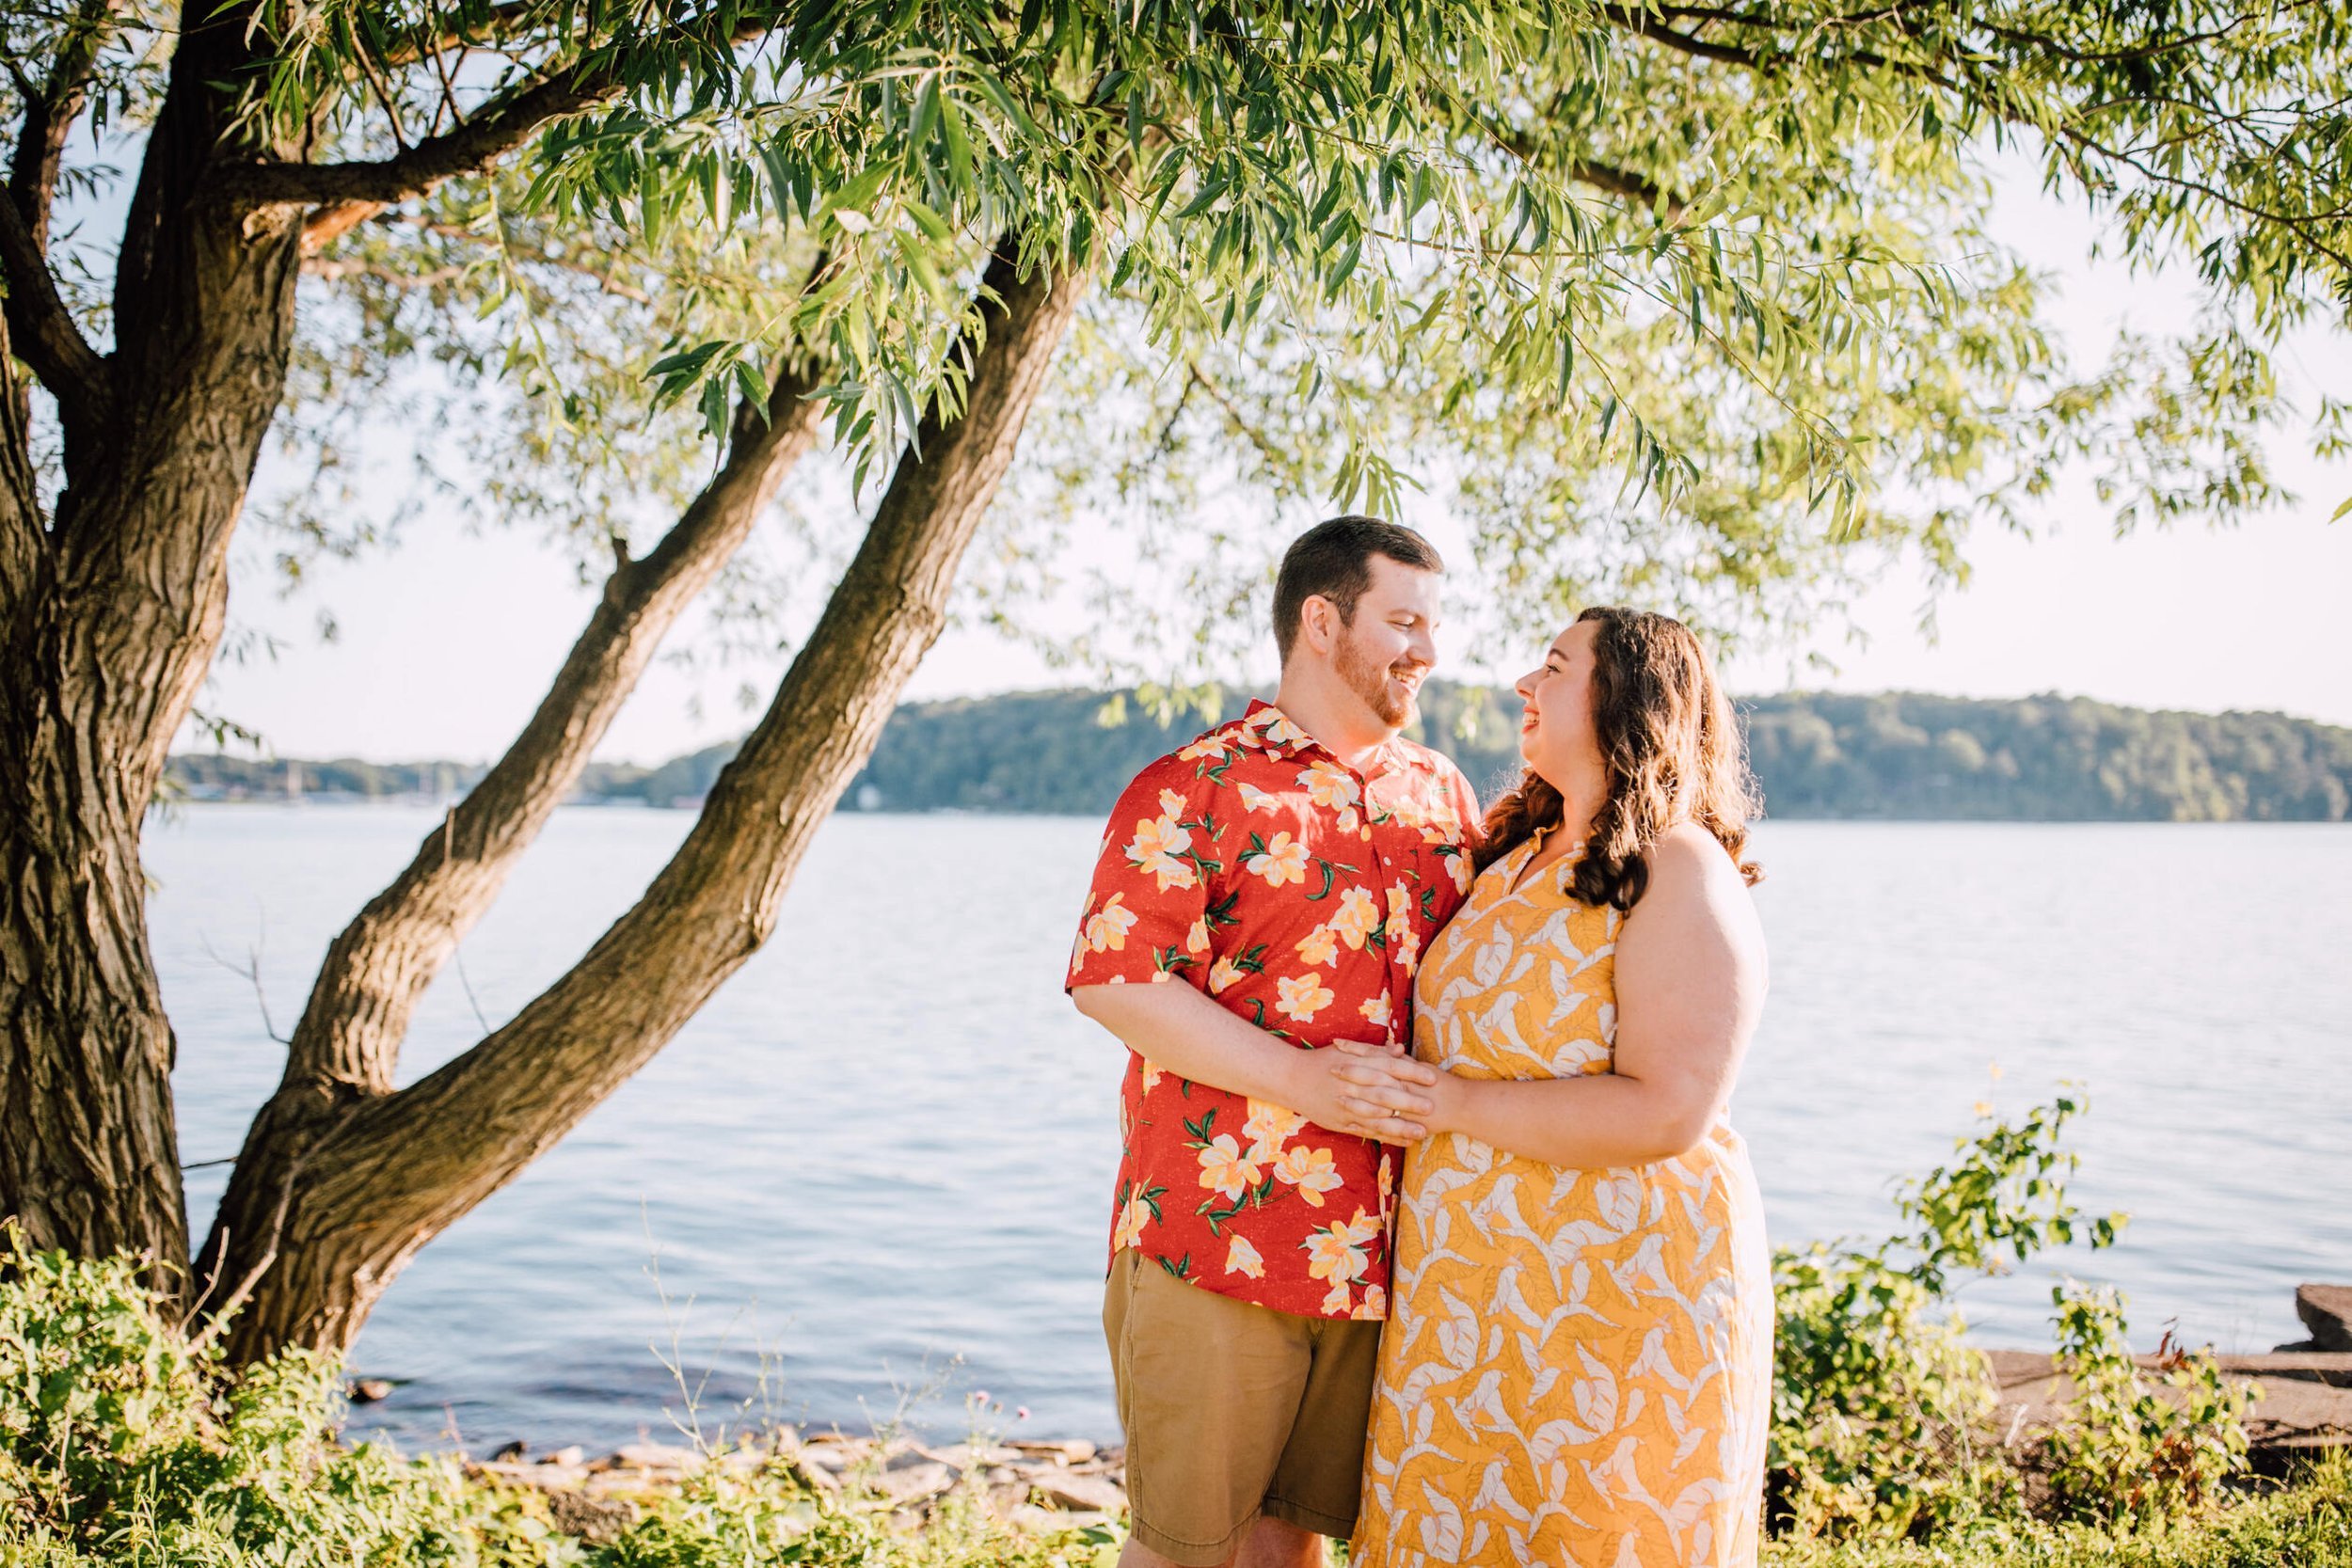  Engaged couple stand close to each other while smiling at each other wearing colorful engagement outfits in a grassy area in front of a Great Lake 